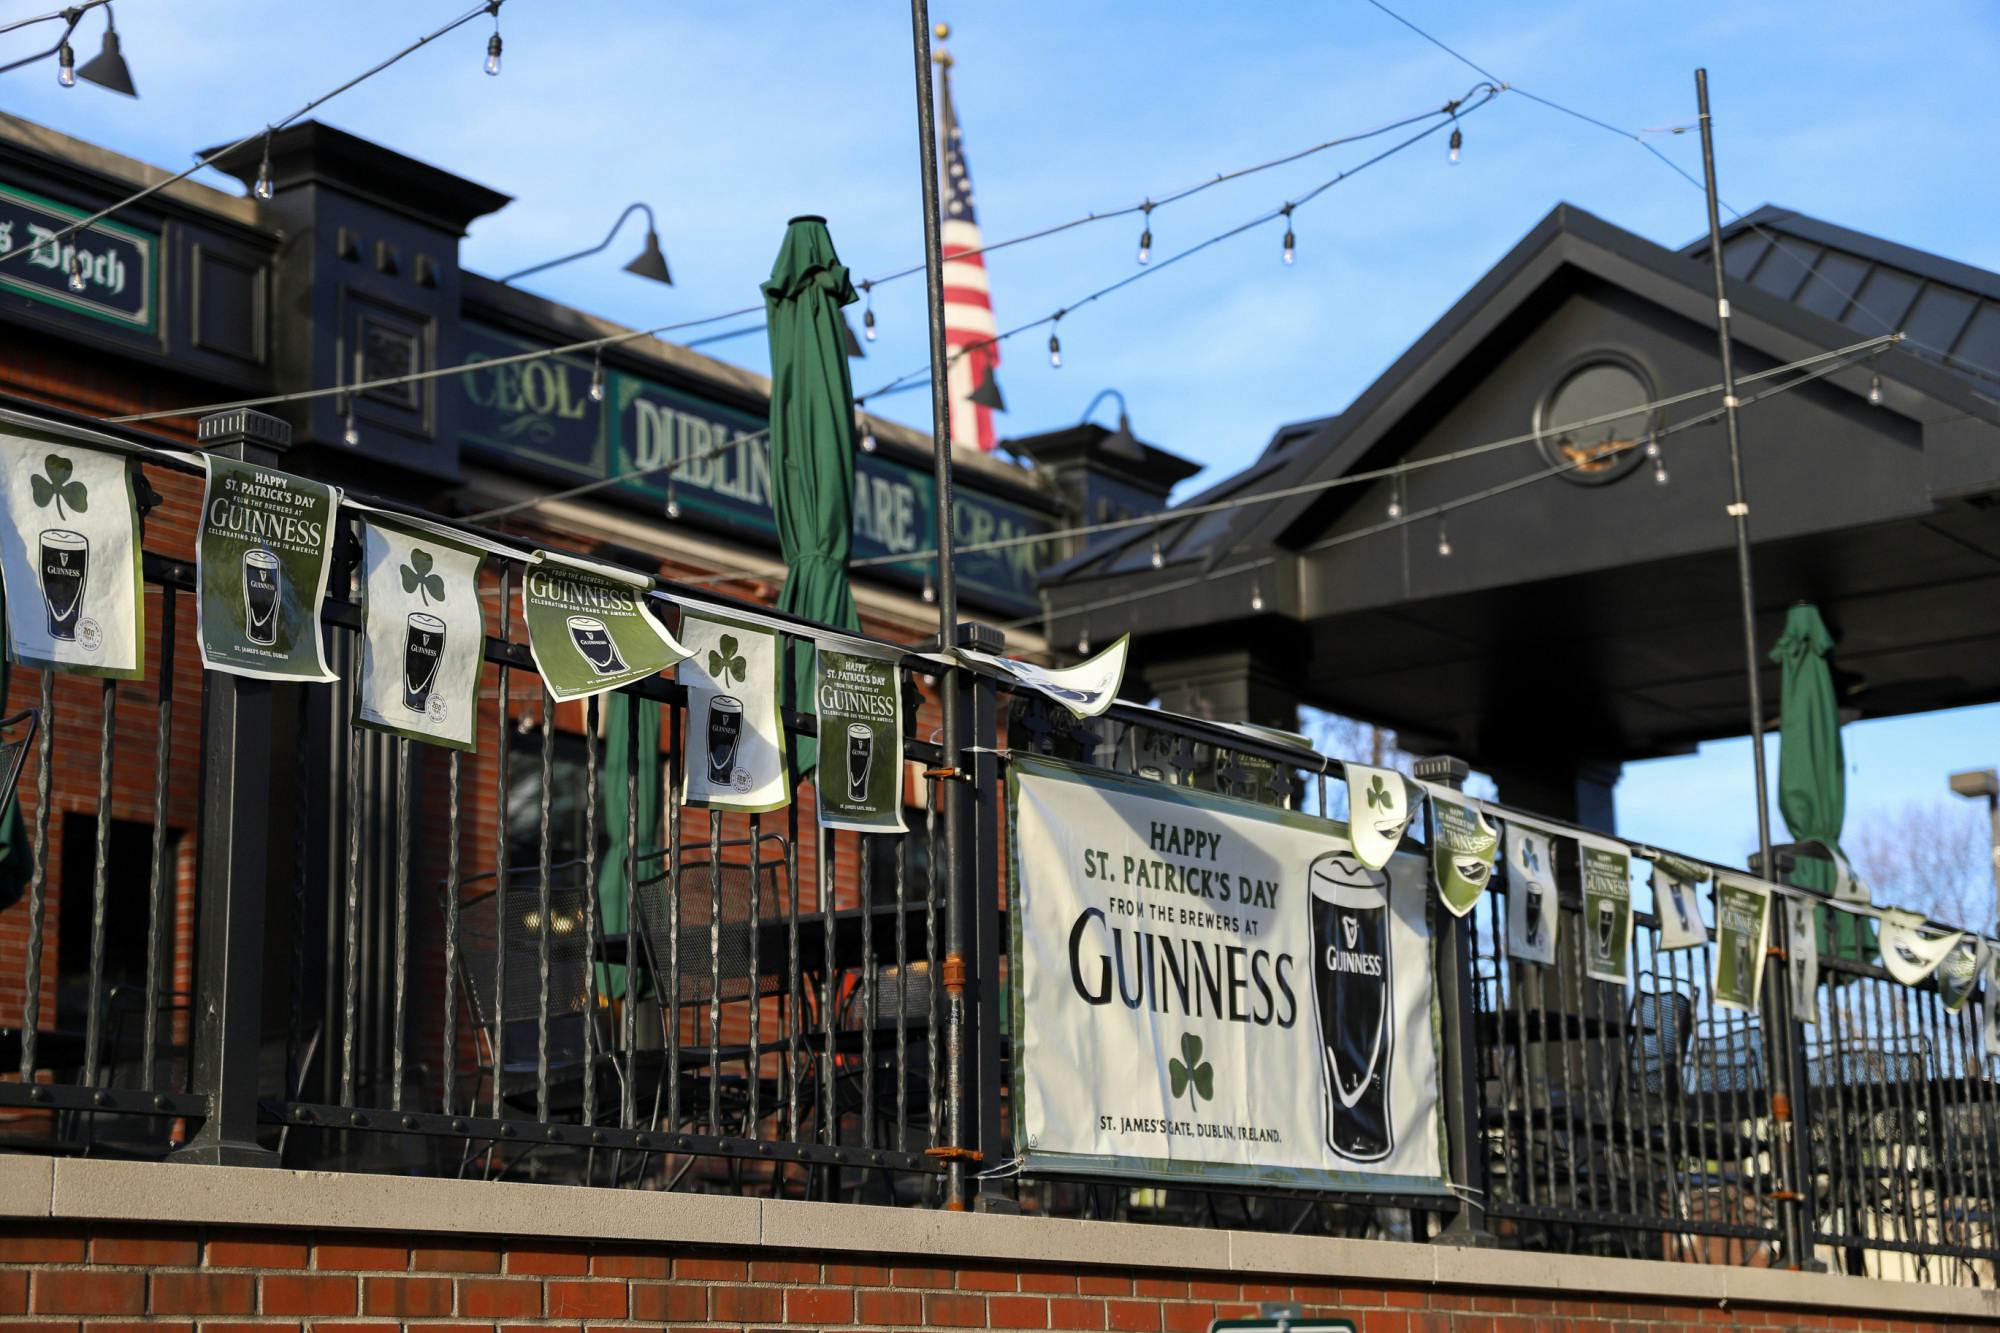 <p>Dublin Square Irish Pub &amp; Restaurant has St. Patrick&#x27;s Day decorations on the outside of the building. Shot on March 14, 2021.</p>